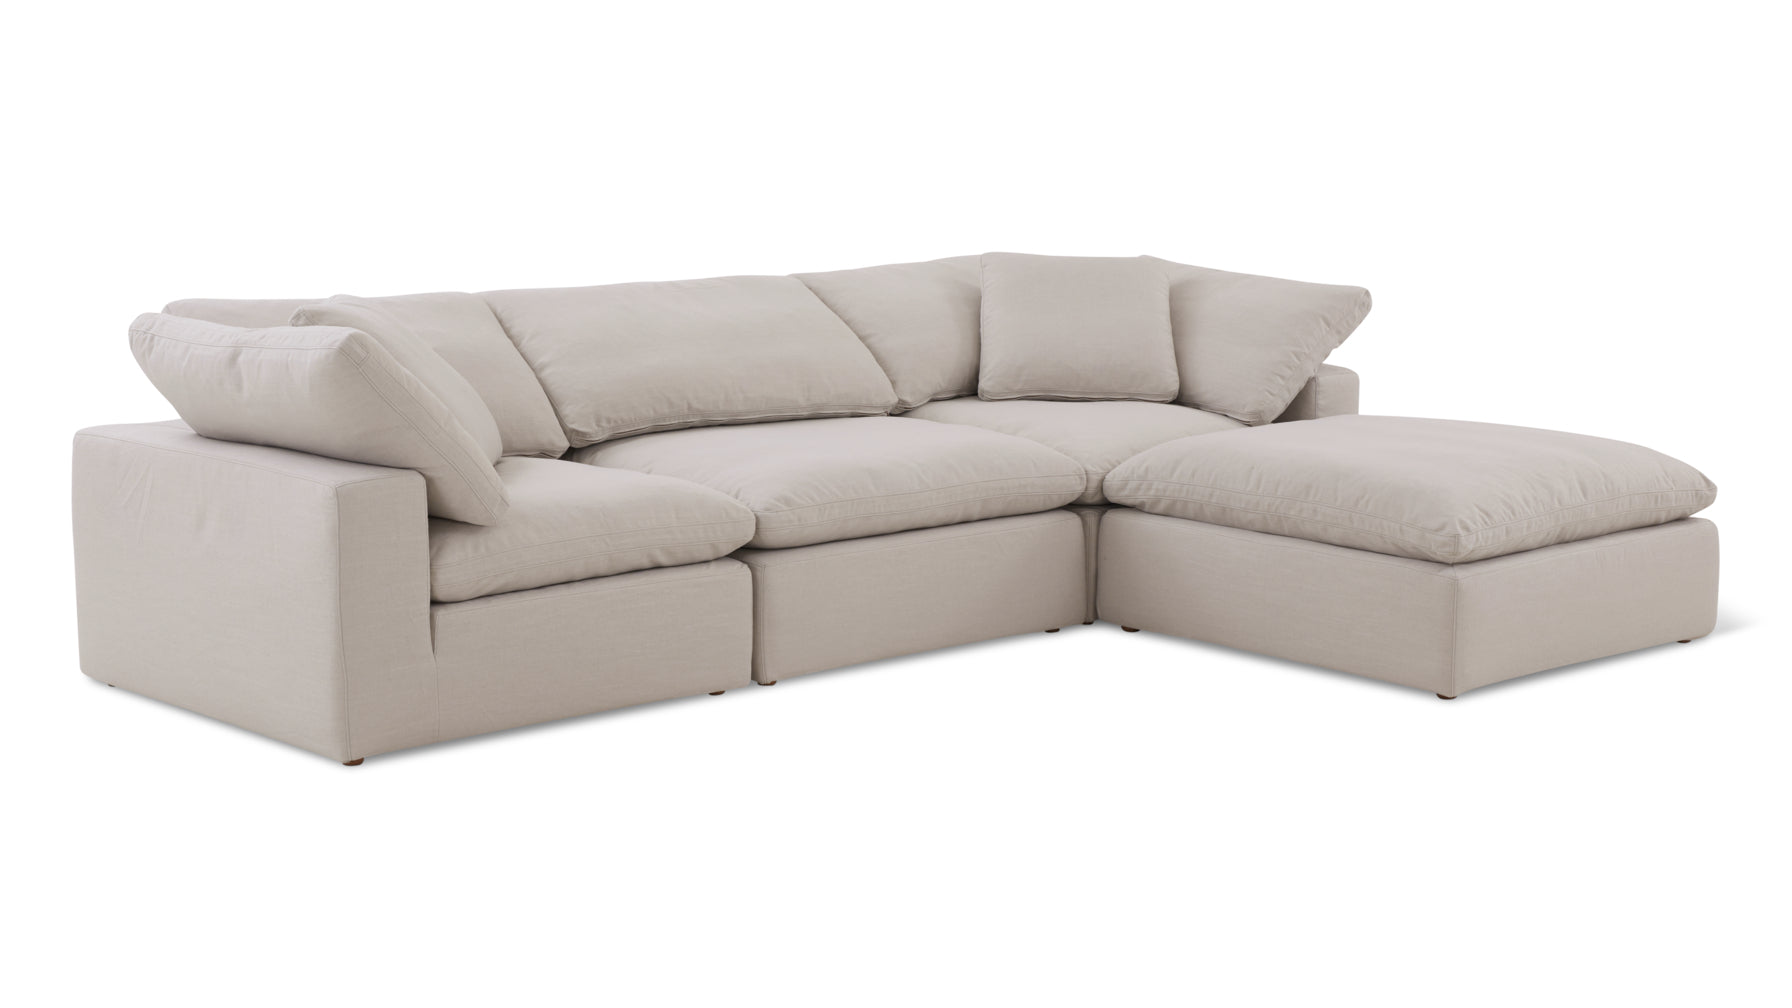 Movie Night™ 4-Piece Modular Sectional, Large, Clay - Image 7